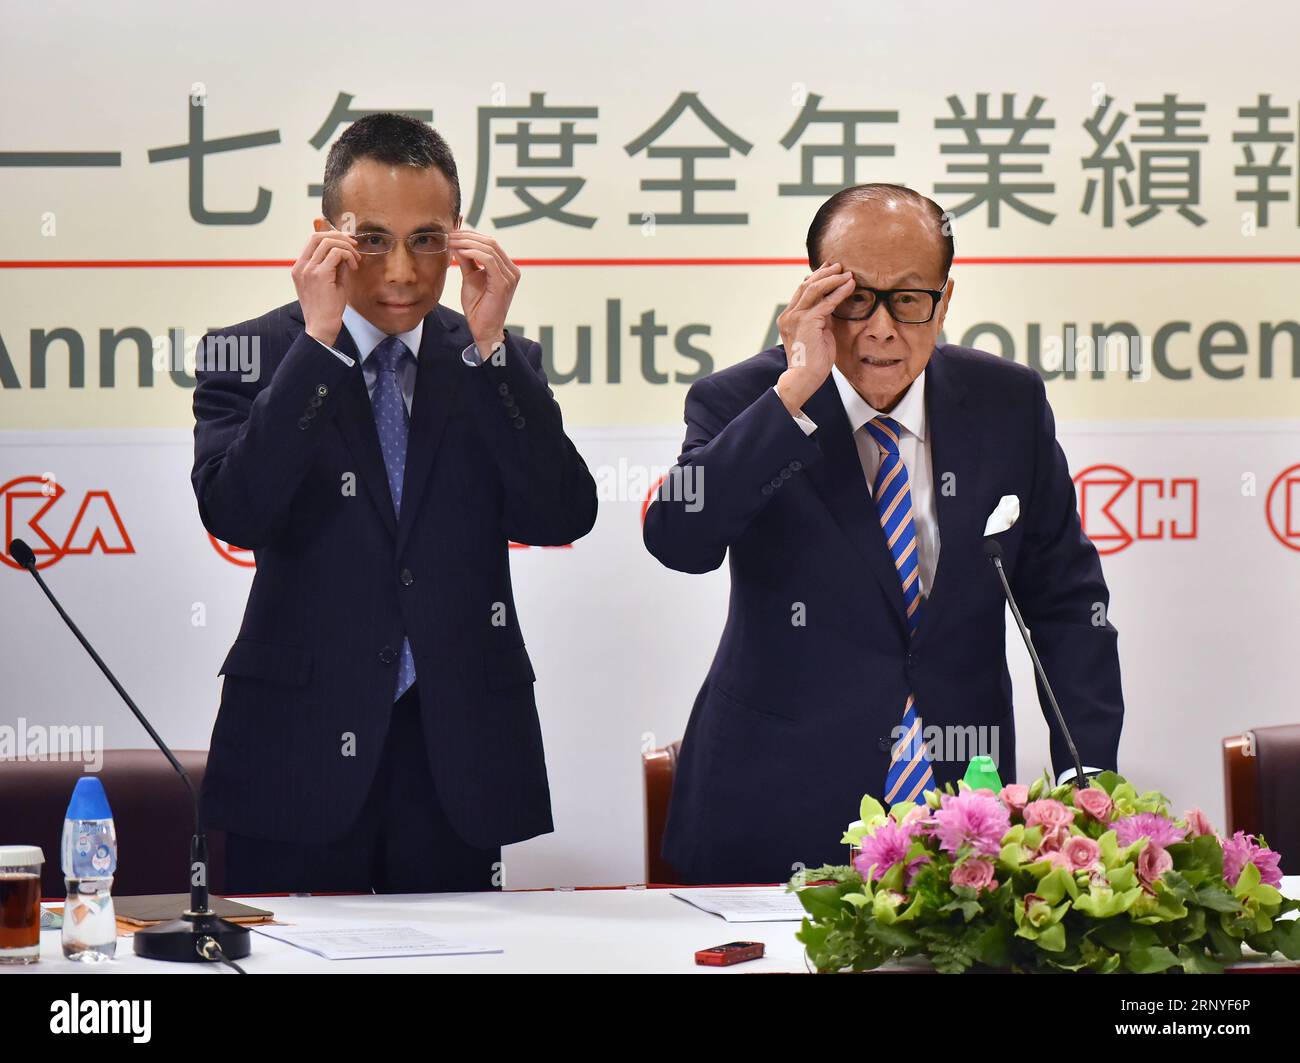 (180316) -- HONG KONG, March 16, 2018 -- Hong Kong tycoon Li Ka-shing (R) and his elder son Victor Li Tzar Kuoi attend a press conference in south China s Hong Kong, March 16, 2018. Li Ka-shing said on Friday that he is retiring from his business empire. Li said he would officially step down as the chairman of CK Hutchison Holdings Ltd. and CK Asset holdings Ltd. at the annual general meeting of the company on May 10 and would serve as a senior adviser. He will be succeeded by his elder son Victor Li Tzar Kuoi. ) (lmm) CHINA-HONG KONG-BUSINESS-LI KA-SHING-RETIREMENT (CN) WangxXi PUBLICATIONxNO Stock Photo